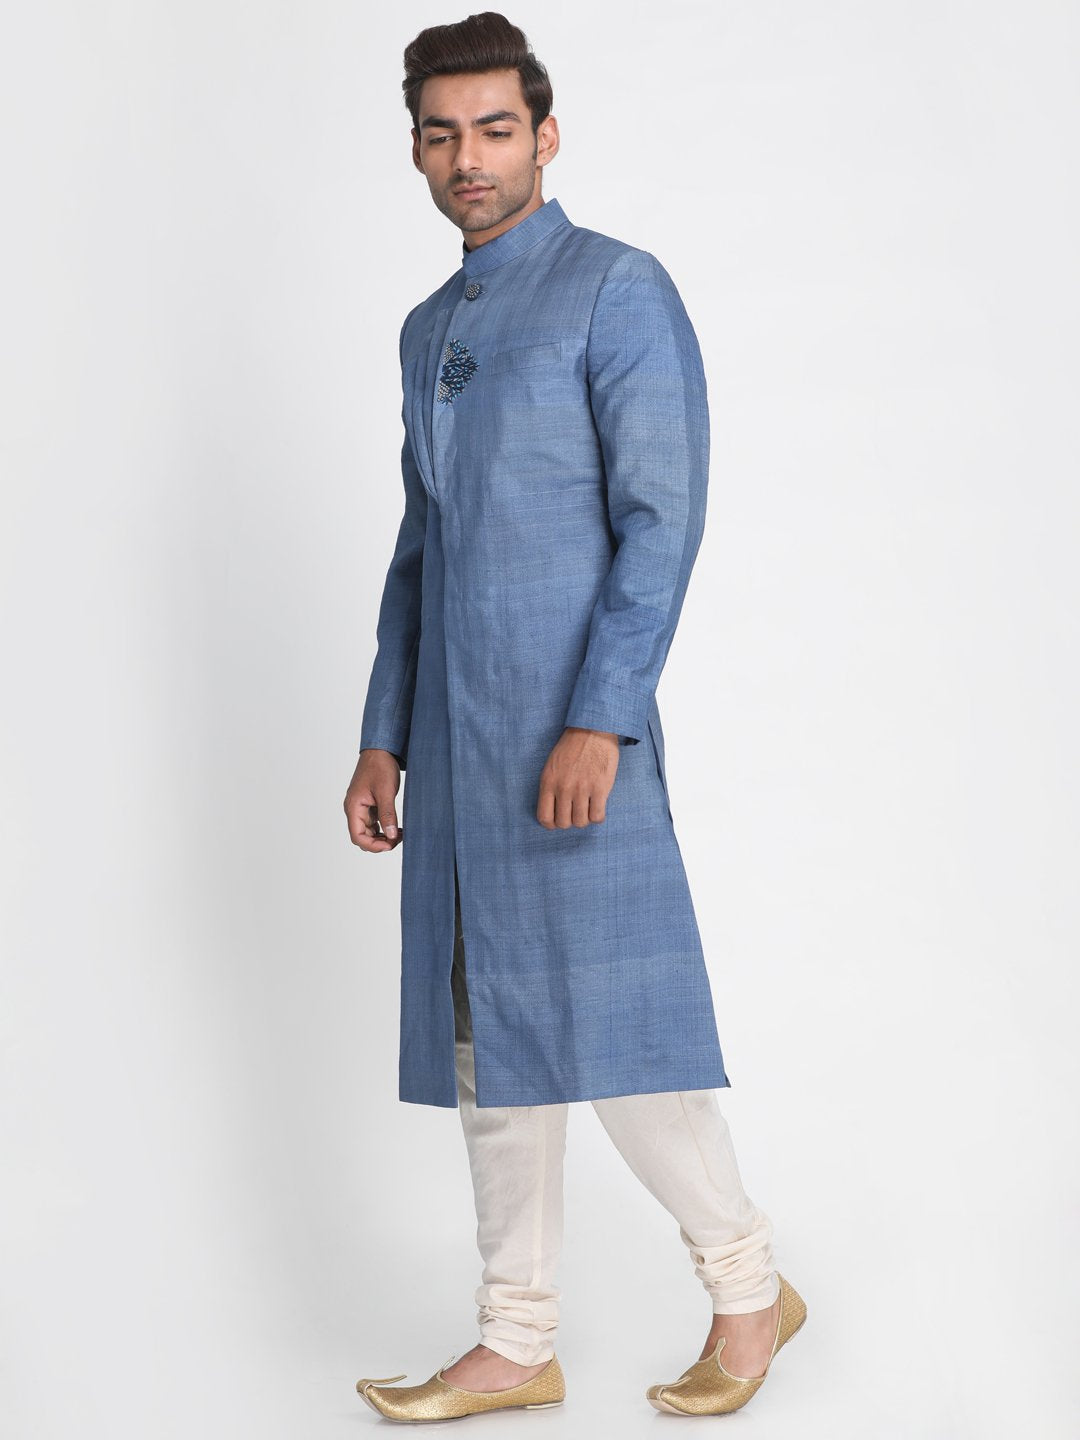 Nakshi Greyish Blue Coloured Intricate Hand Embroided Three Panel Styled Tussar Silk Sherwani Inspired By Gont Art